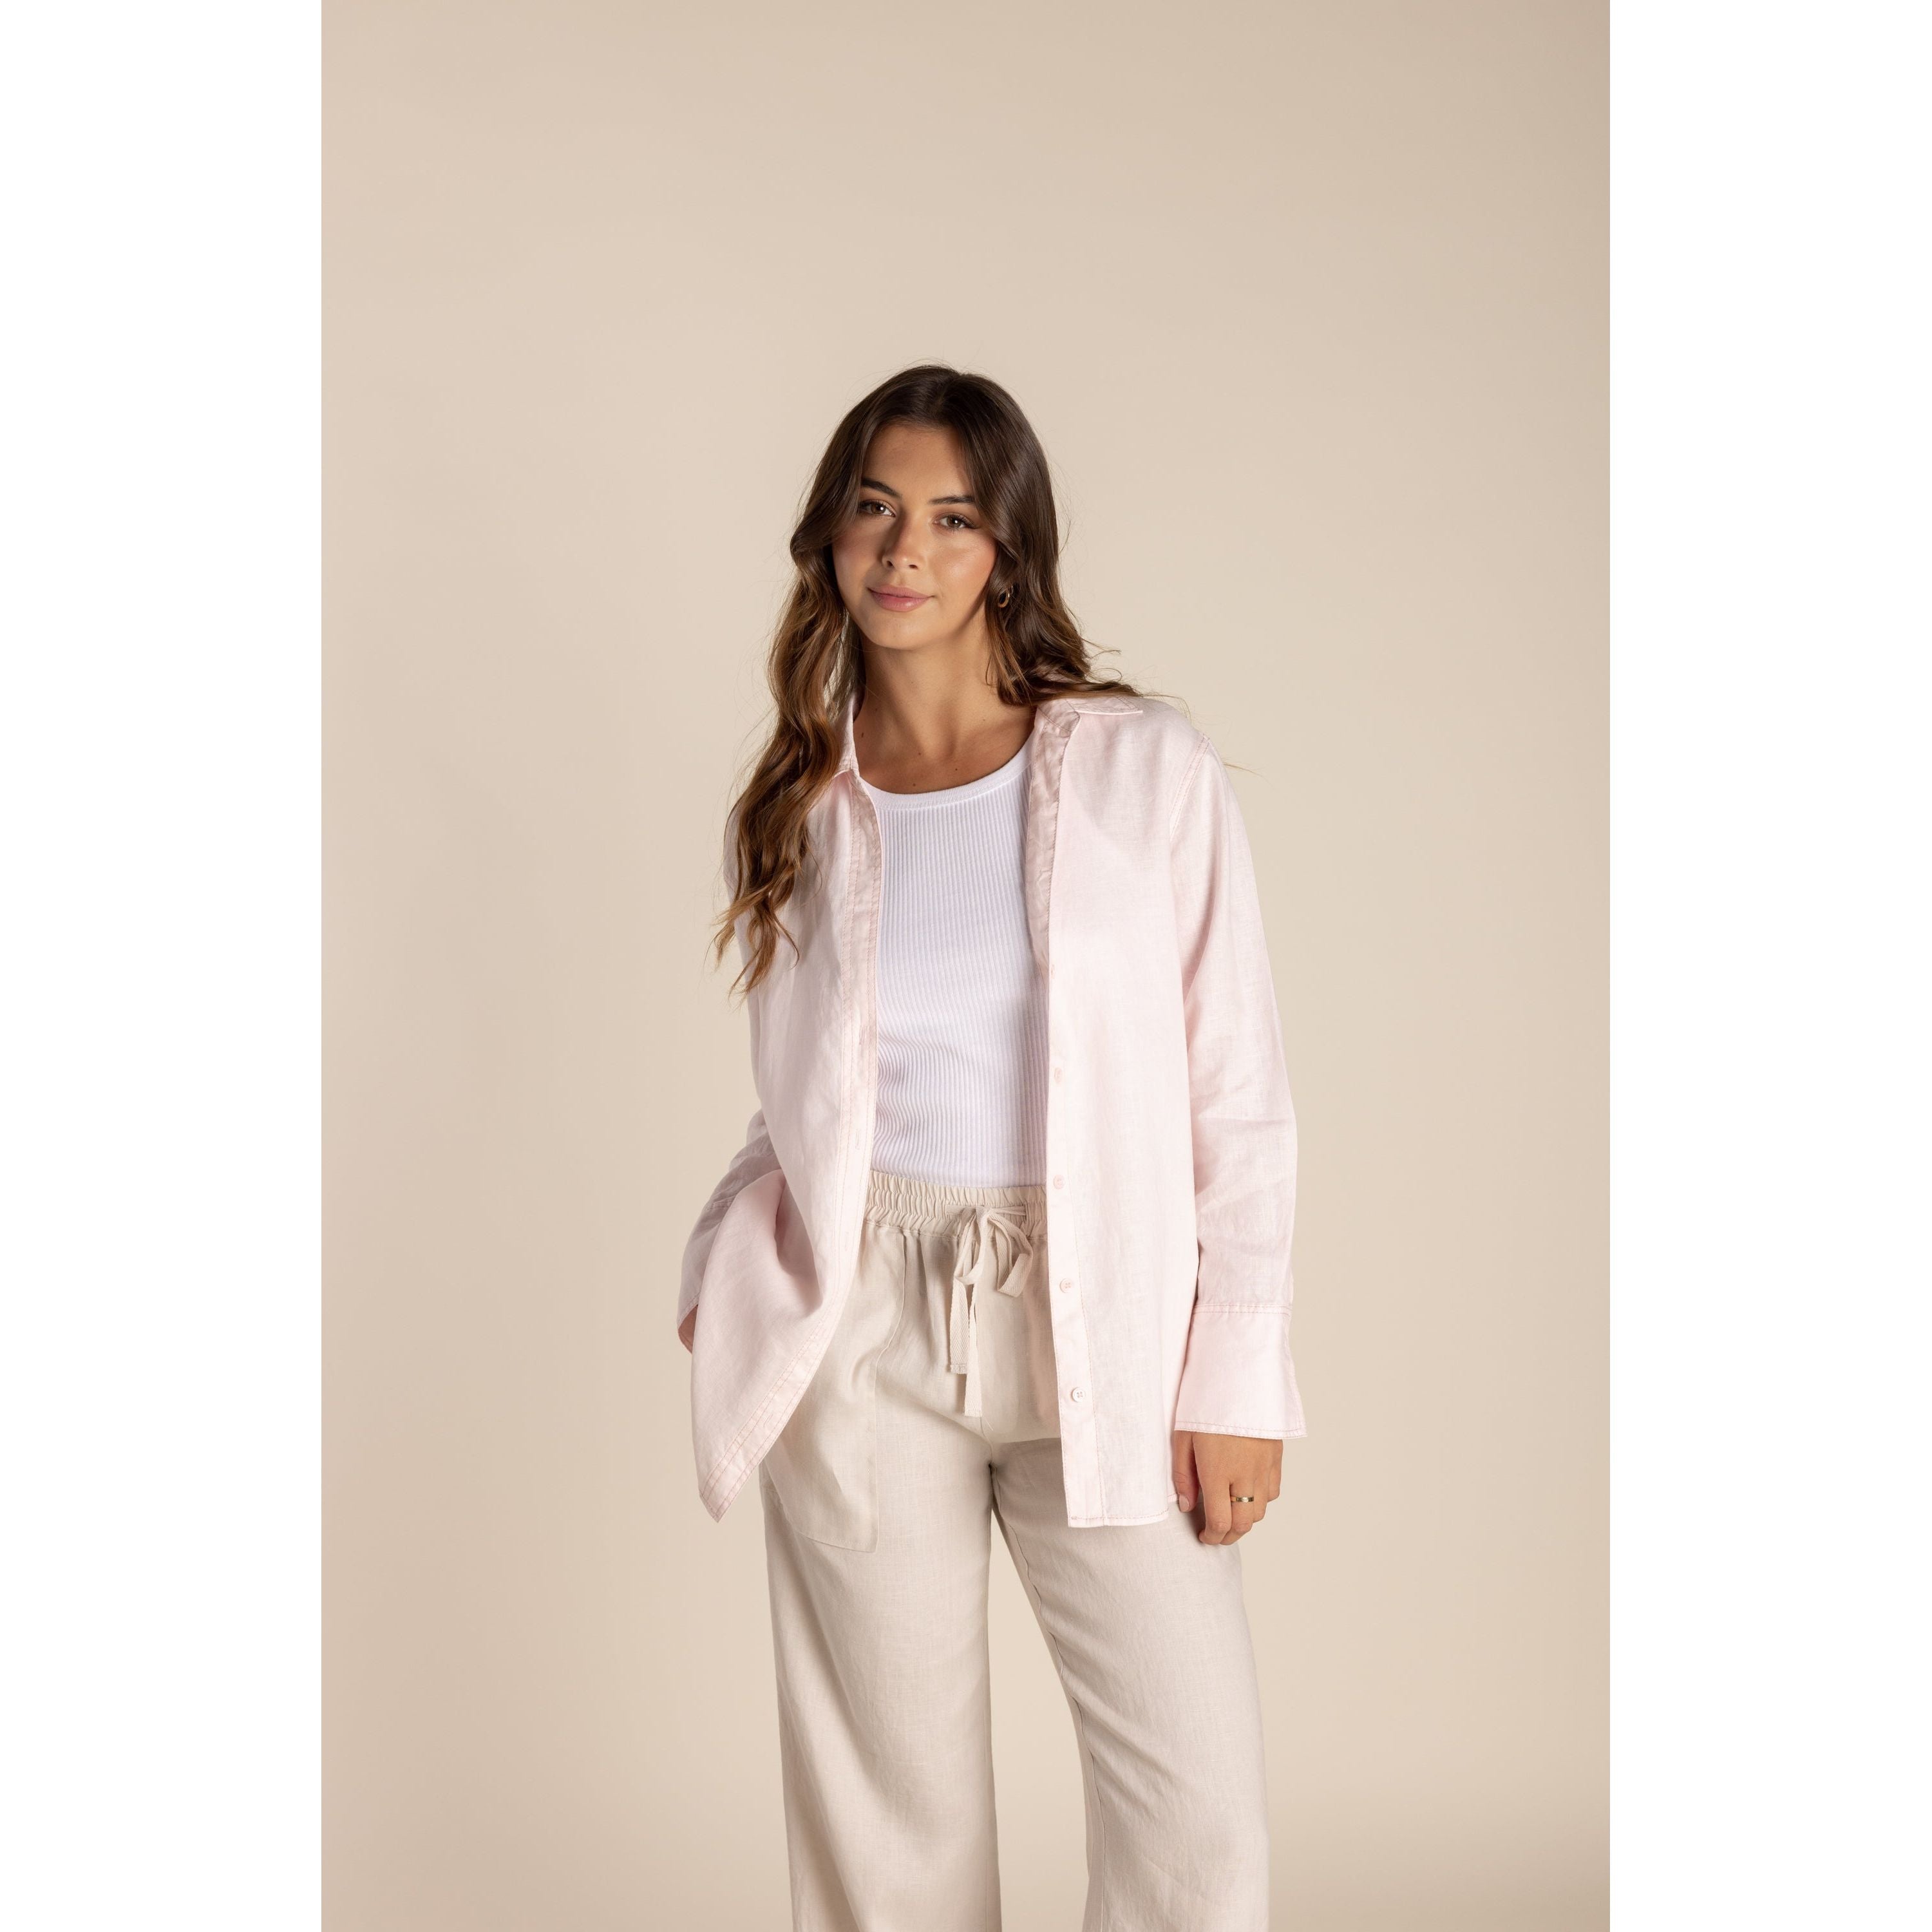 Two T's - Linen Soft Shirt Pale Pink